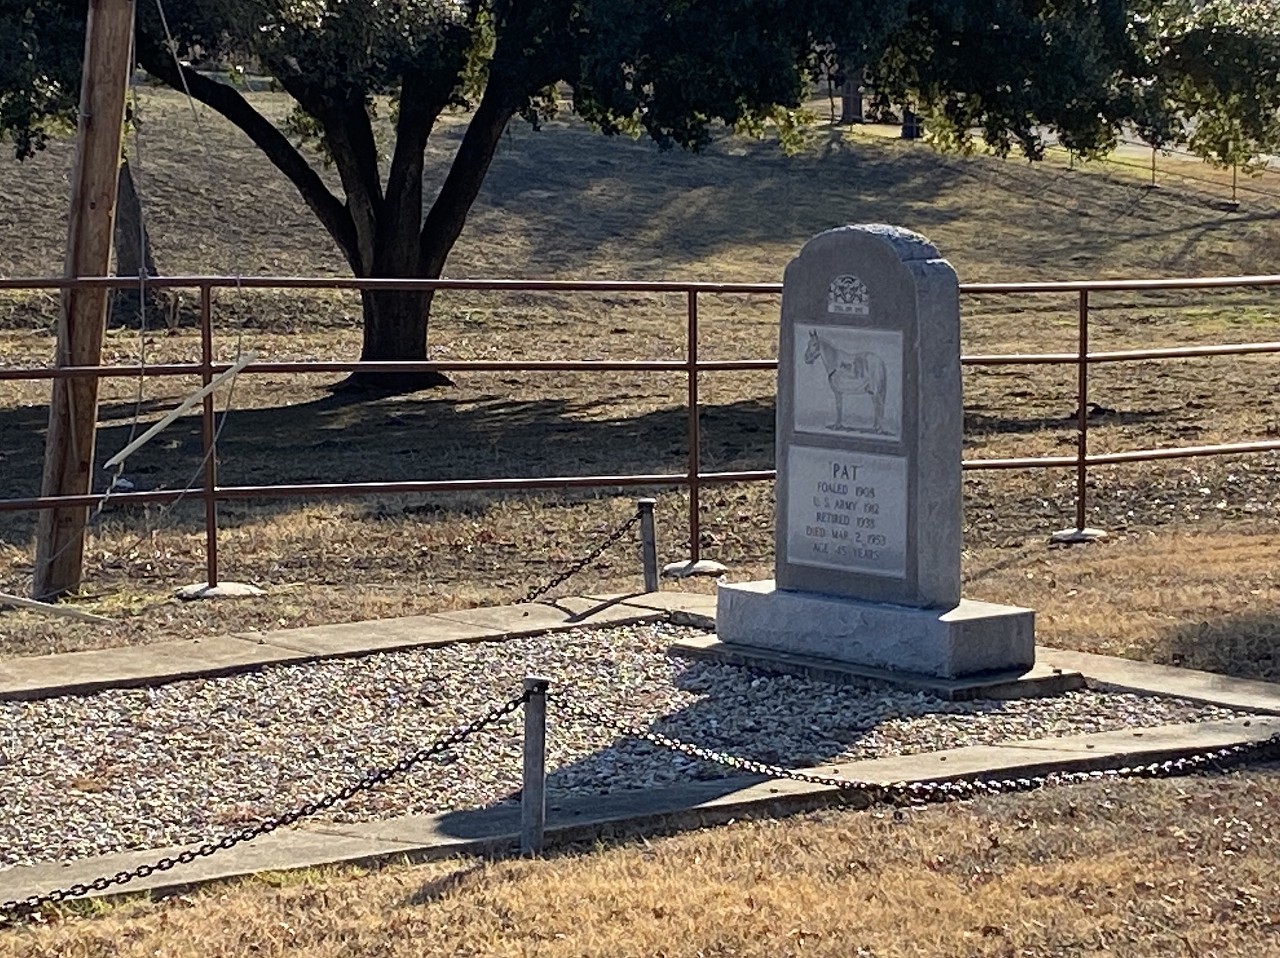 There's a gravesite honoring a U.S. Cavalry horse at Ft. Sam Houston. 
Located on the northwest side of Ft. Sam Houston near the Westfort neighborhood is a single, large grave, where the beloved Pat the Horse is buried. Pat was a cavalry horse in the U.S. Army in the early 1900's. When the army decommissioned its cavalry, Pat was in his 20s and was set to be euthanized, but the soldiers at Ft. Sam Houston lobbied Washington for him to be spared. The request was approved and Pat spent his retirement at the fort. When Pat died at the ripe old age of 45 he was honored with a grave with his portrait on the headstone.